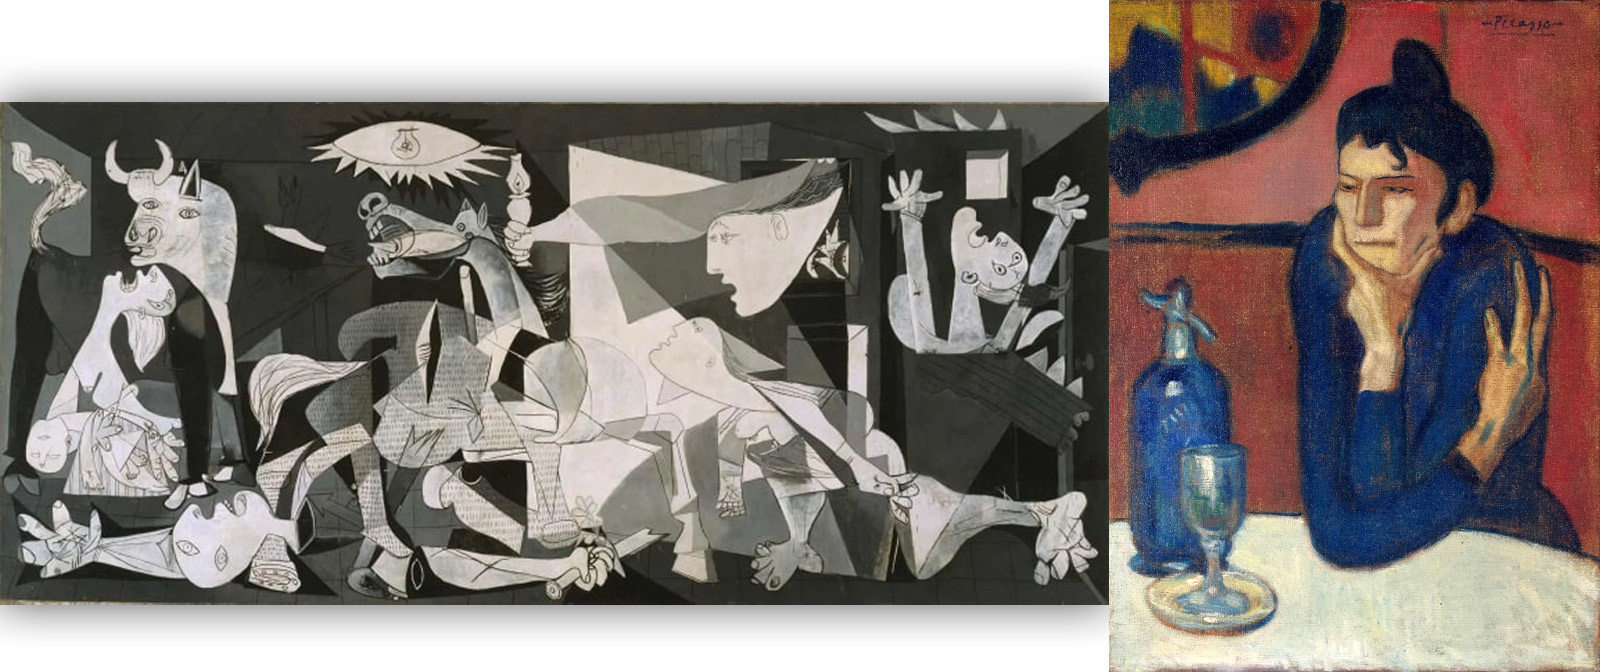 Famous Picasso paintings that all cultured people should know.